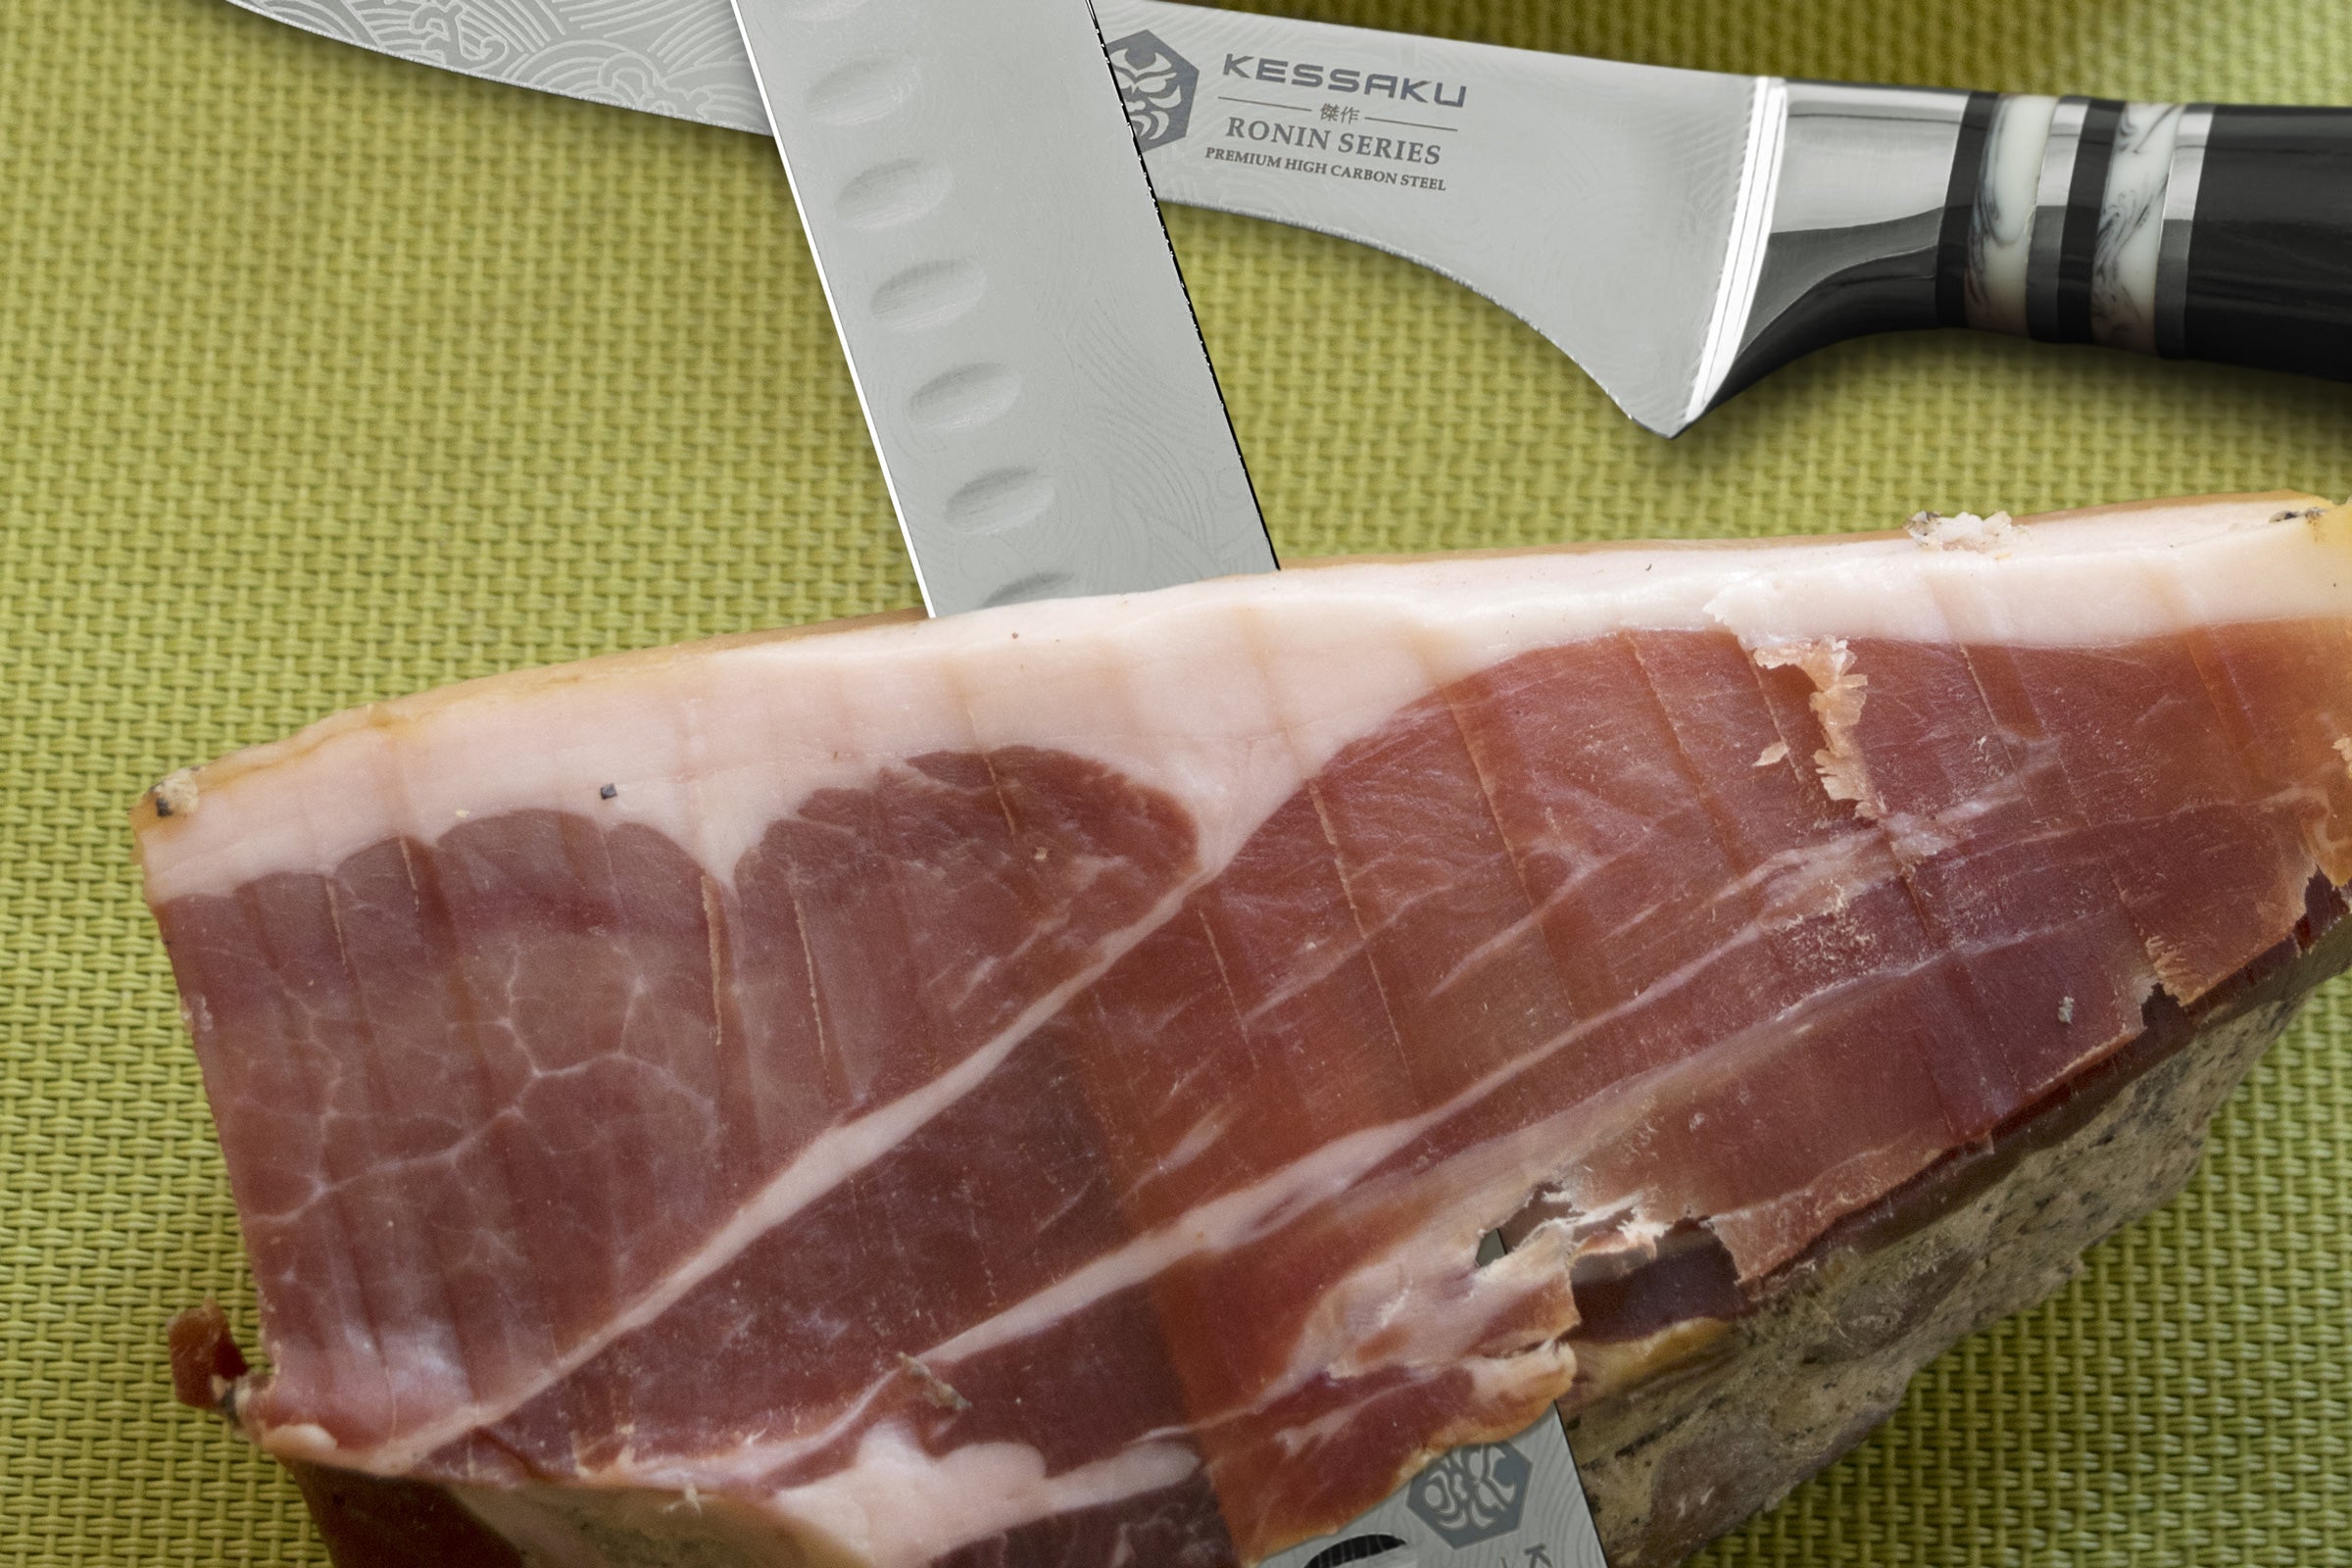 The Ronin Carving Knife used to slice Jamón